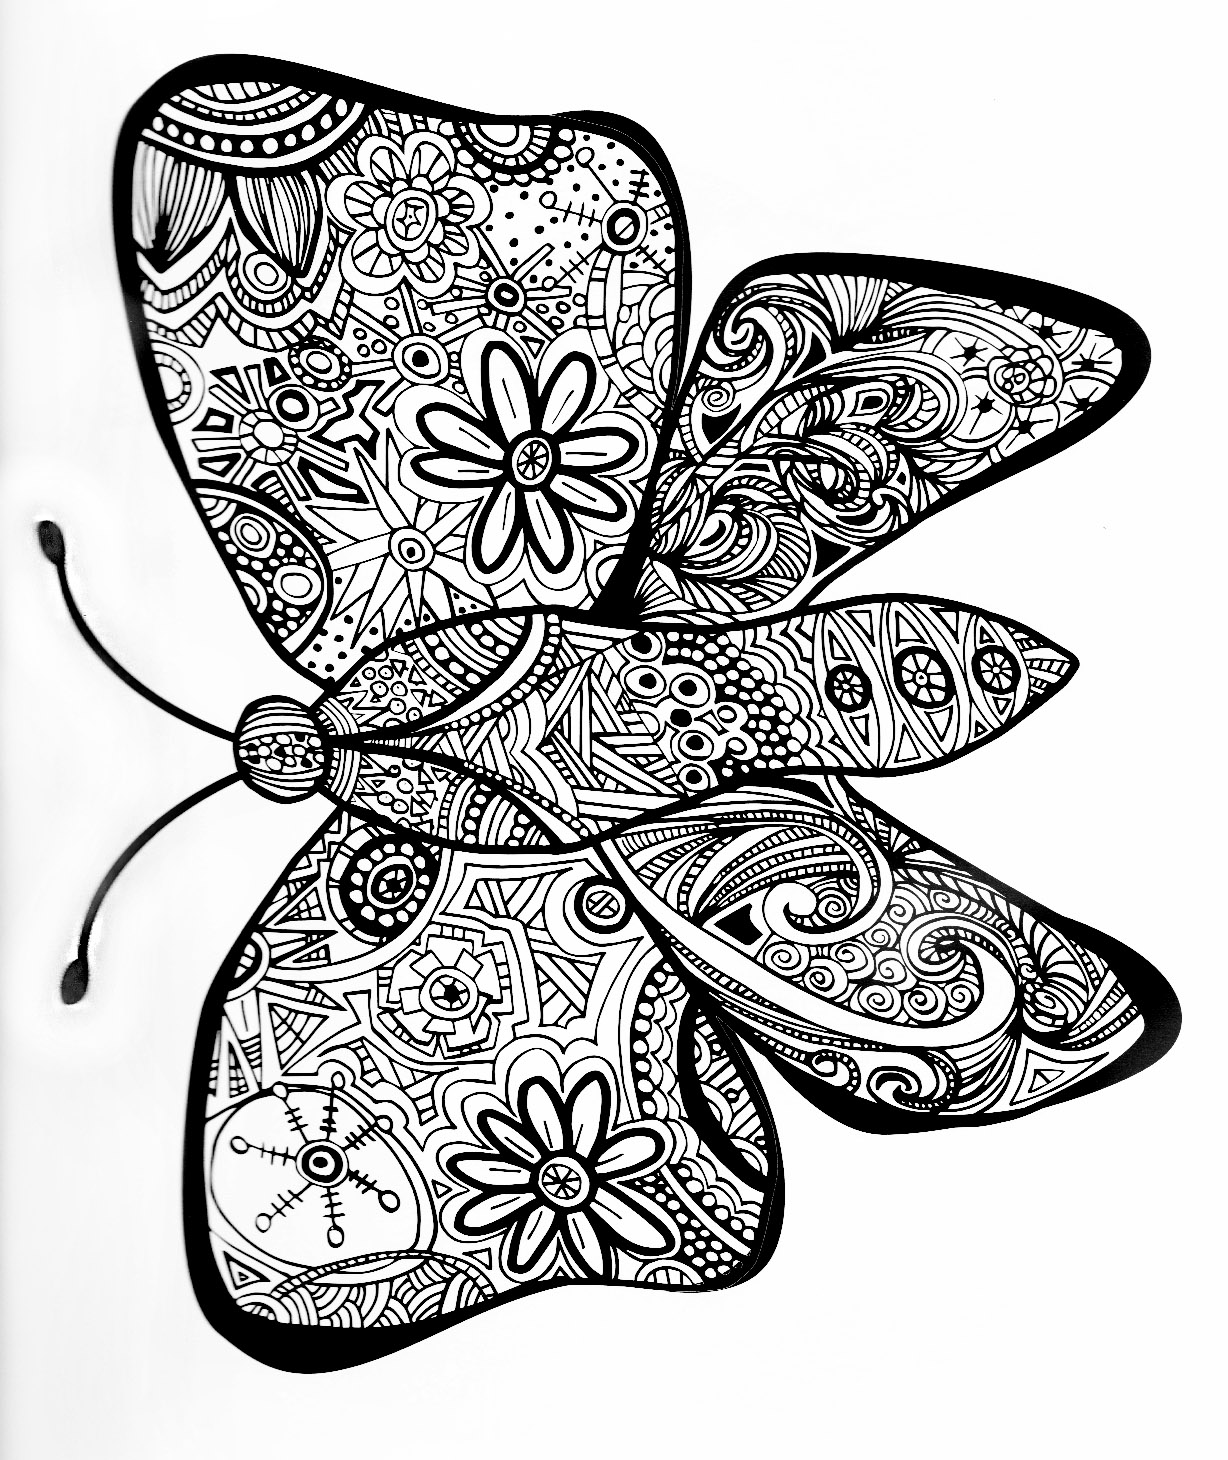 Butterfly to download and color